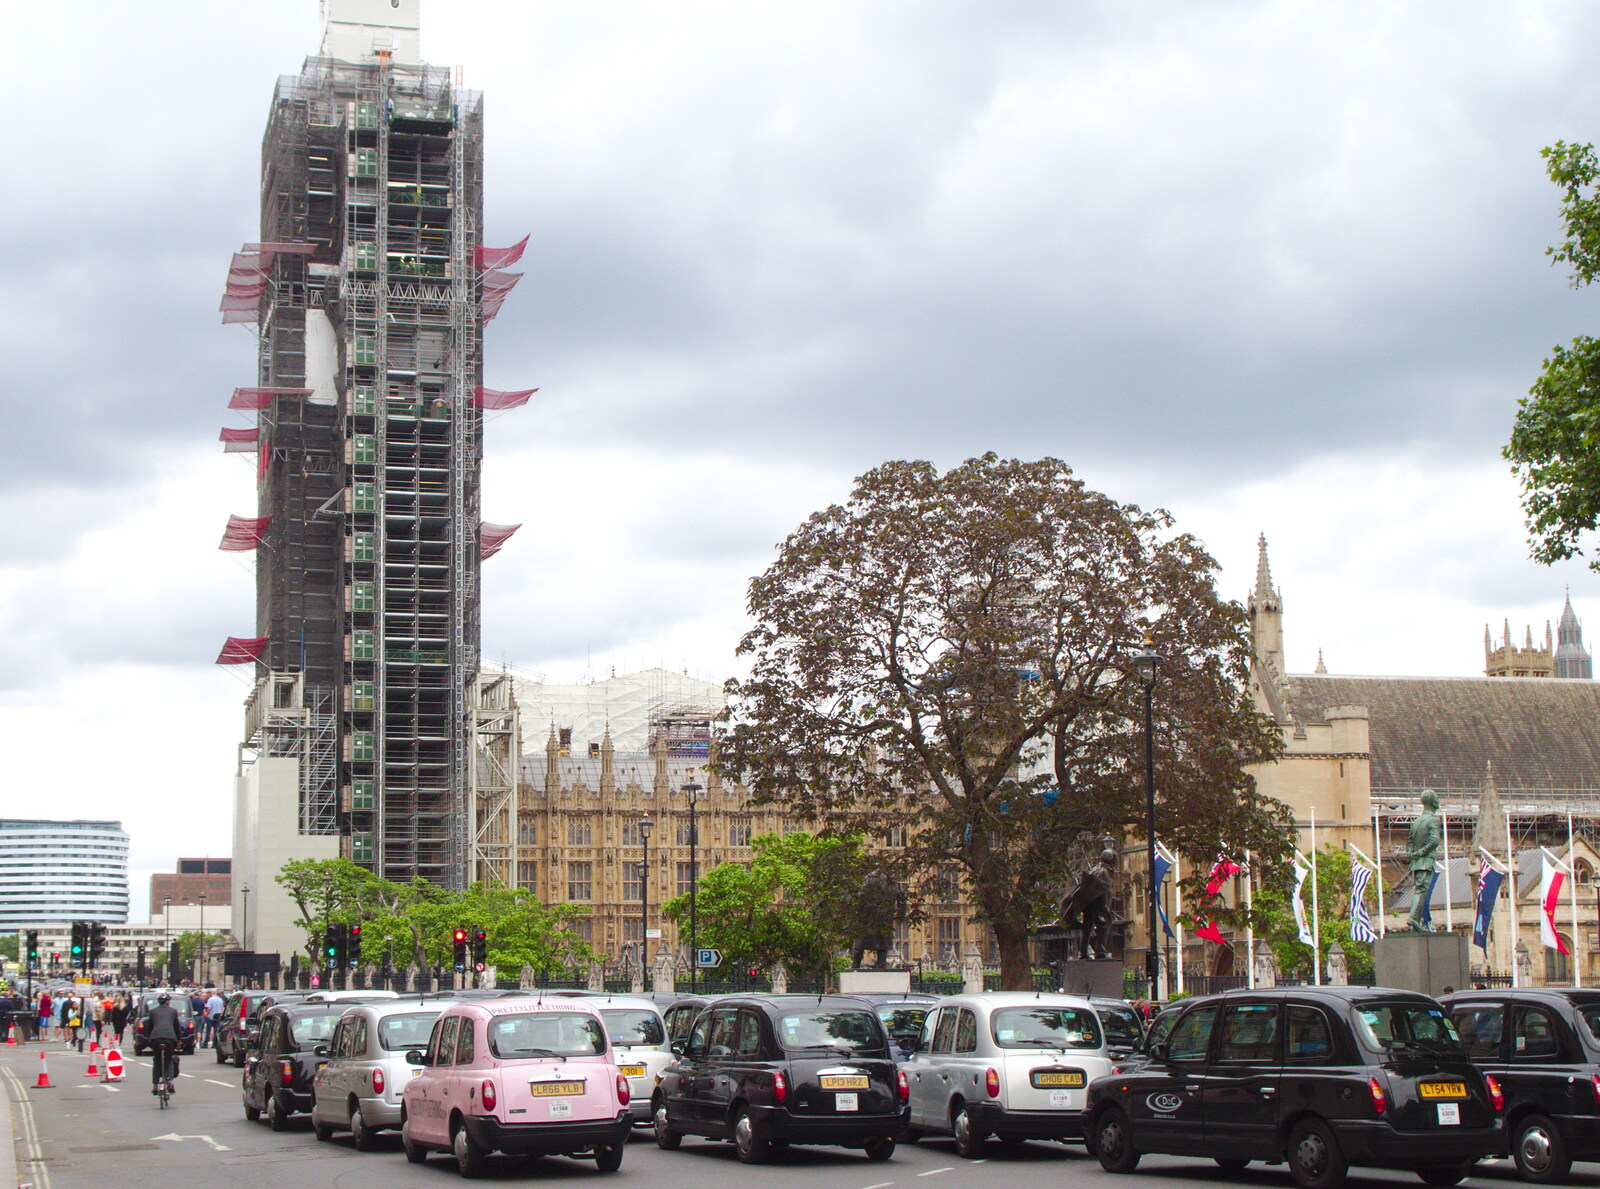 The BSCC at Gissing, Taxi Protests and Eye Scarecrows - 8th June 2019: Taxis park up in Parliament Square